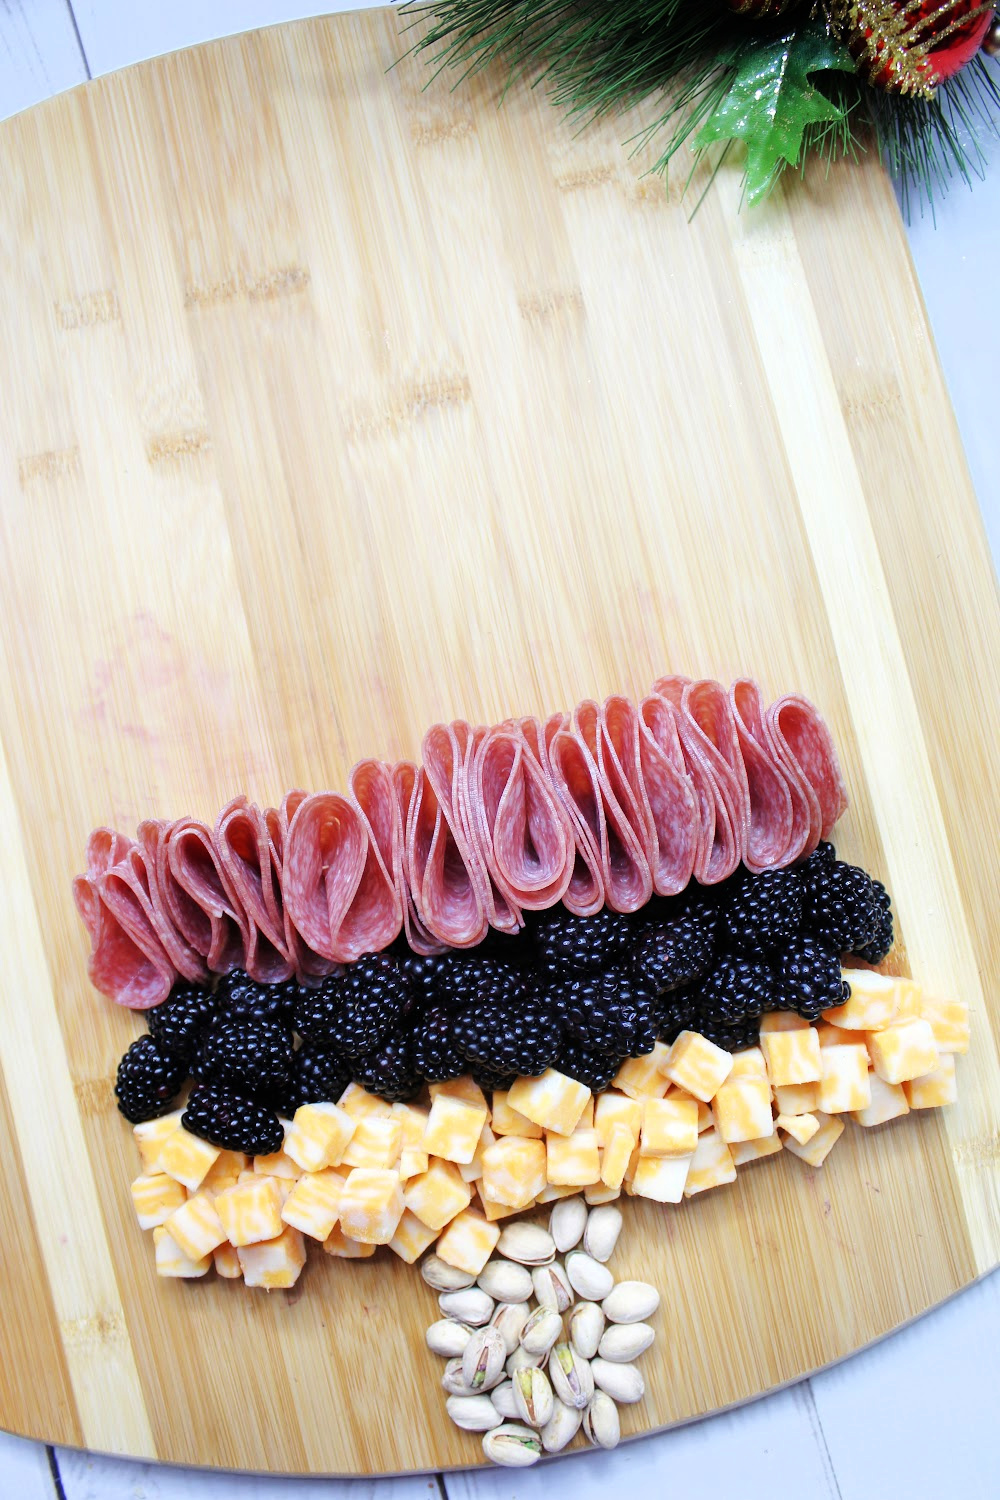 An empty charcuterie board using nuts as the trunk of a Christmas tree. Cheese, meet and berries are the first layers on the shape of the tree.